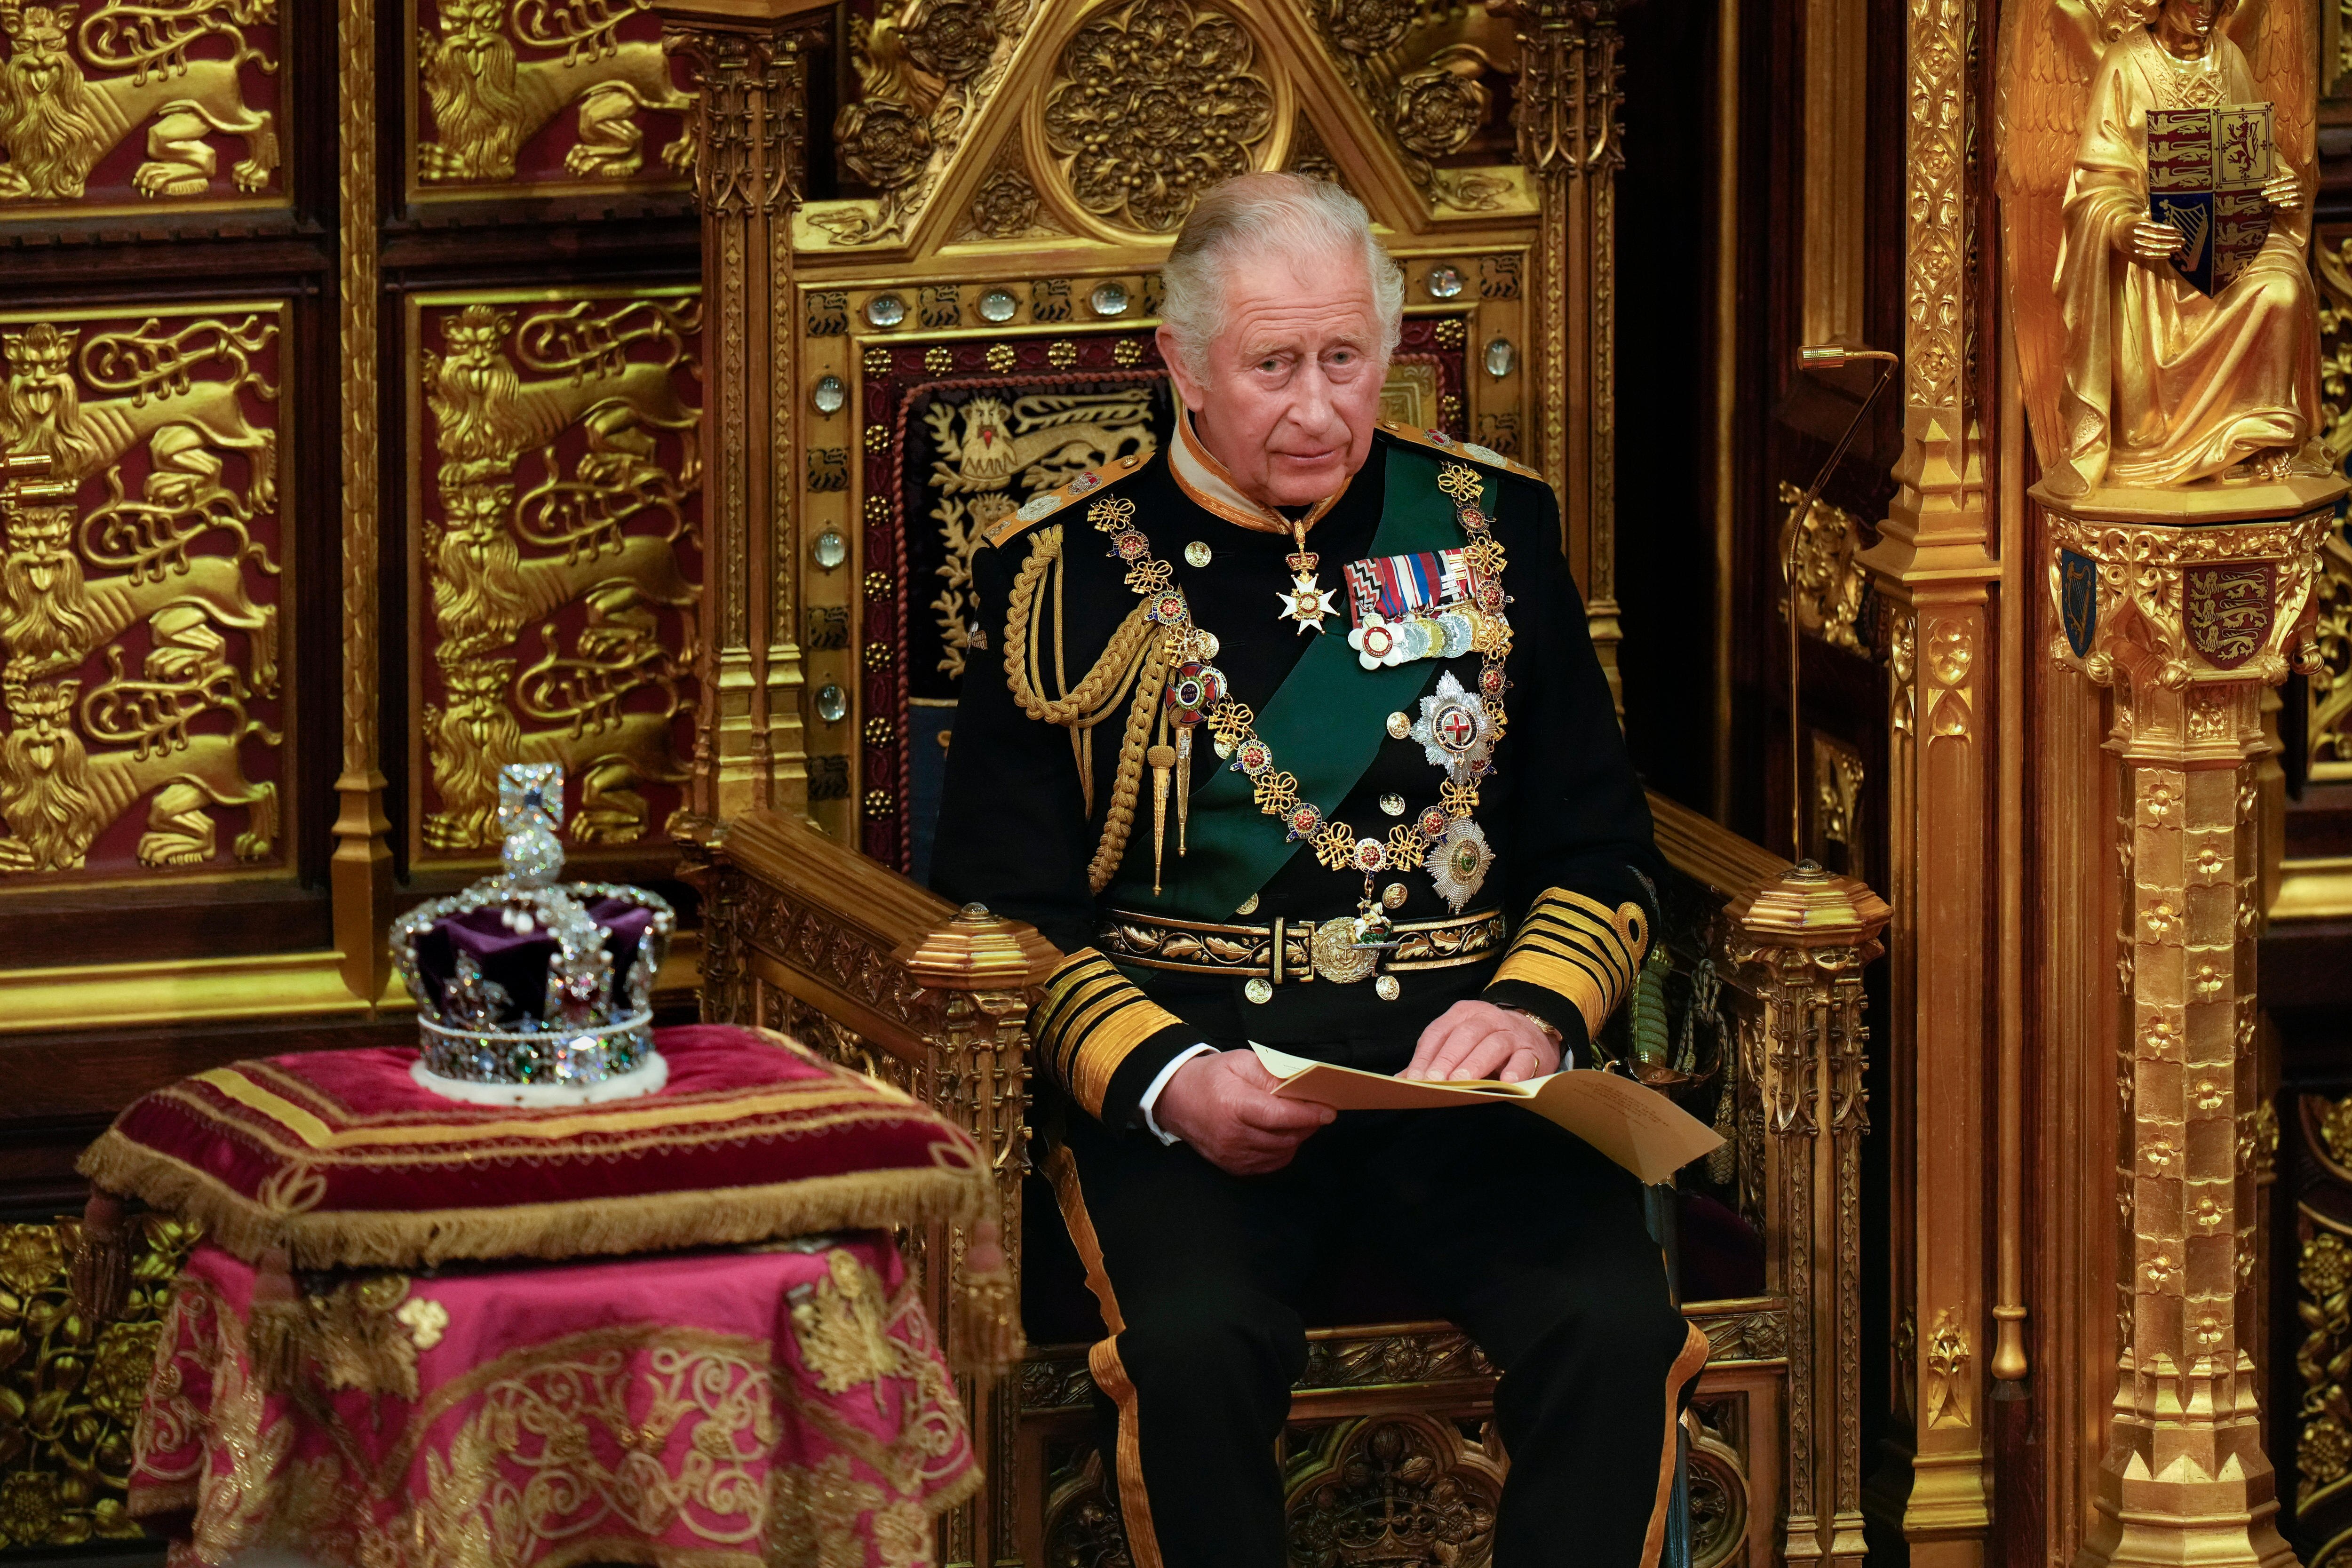 Will the next coronation reflect a modern and religiously diverse Britain?